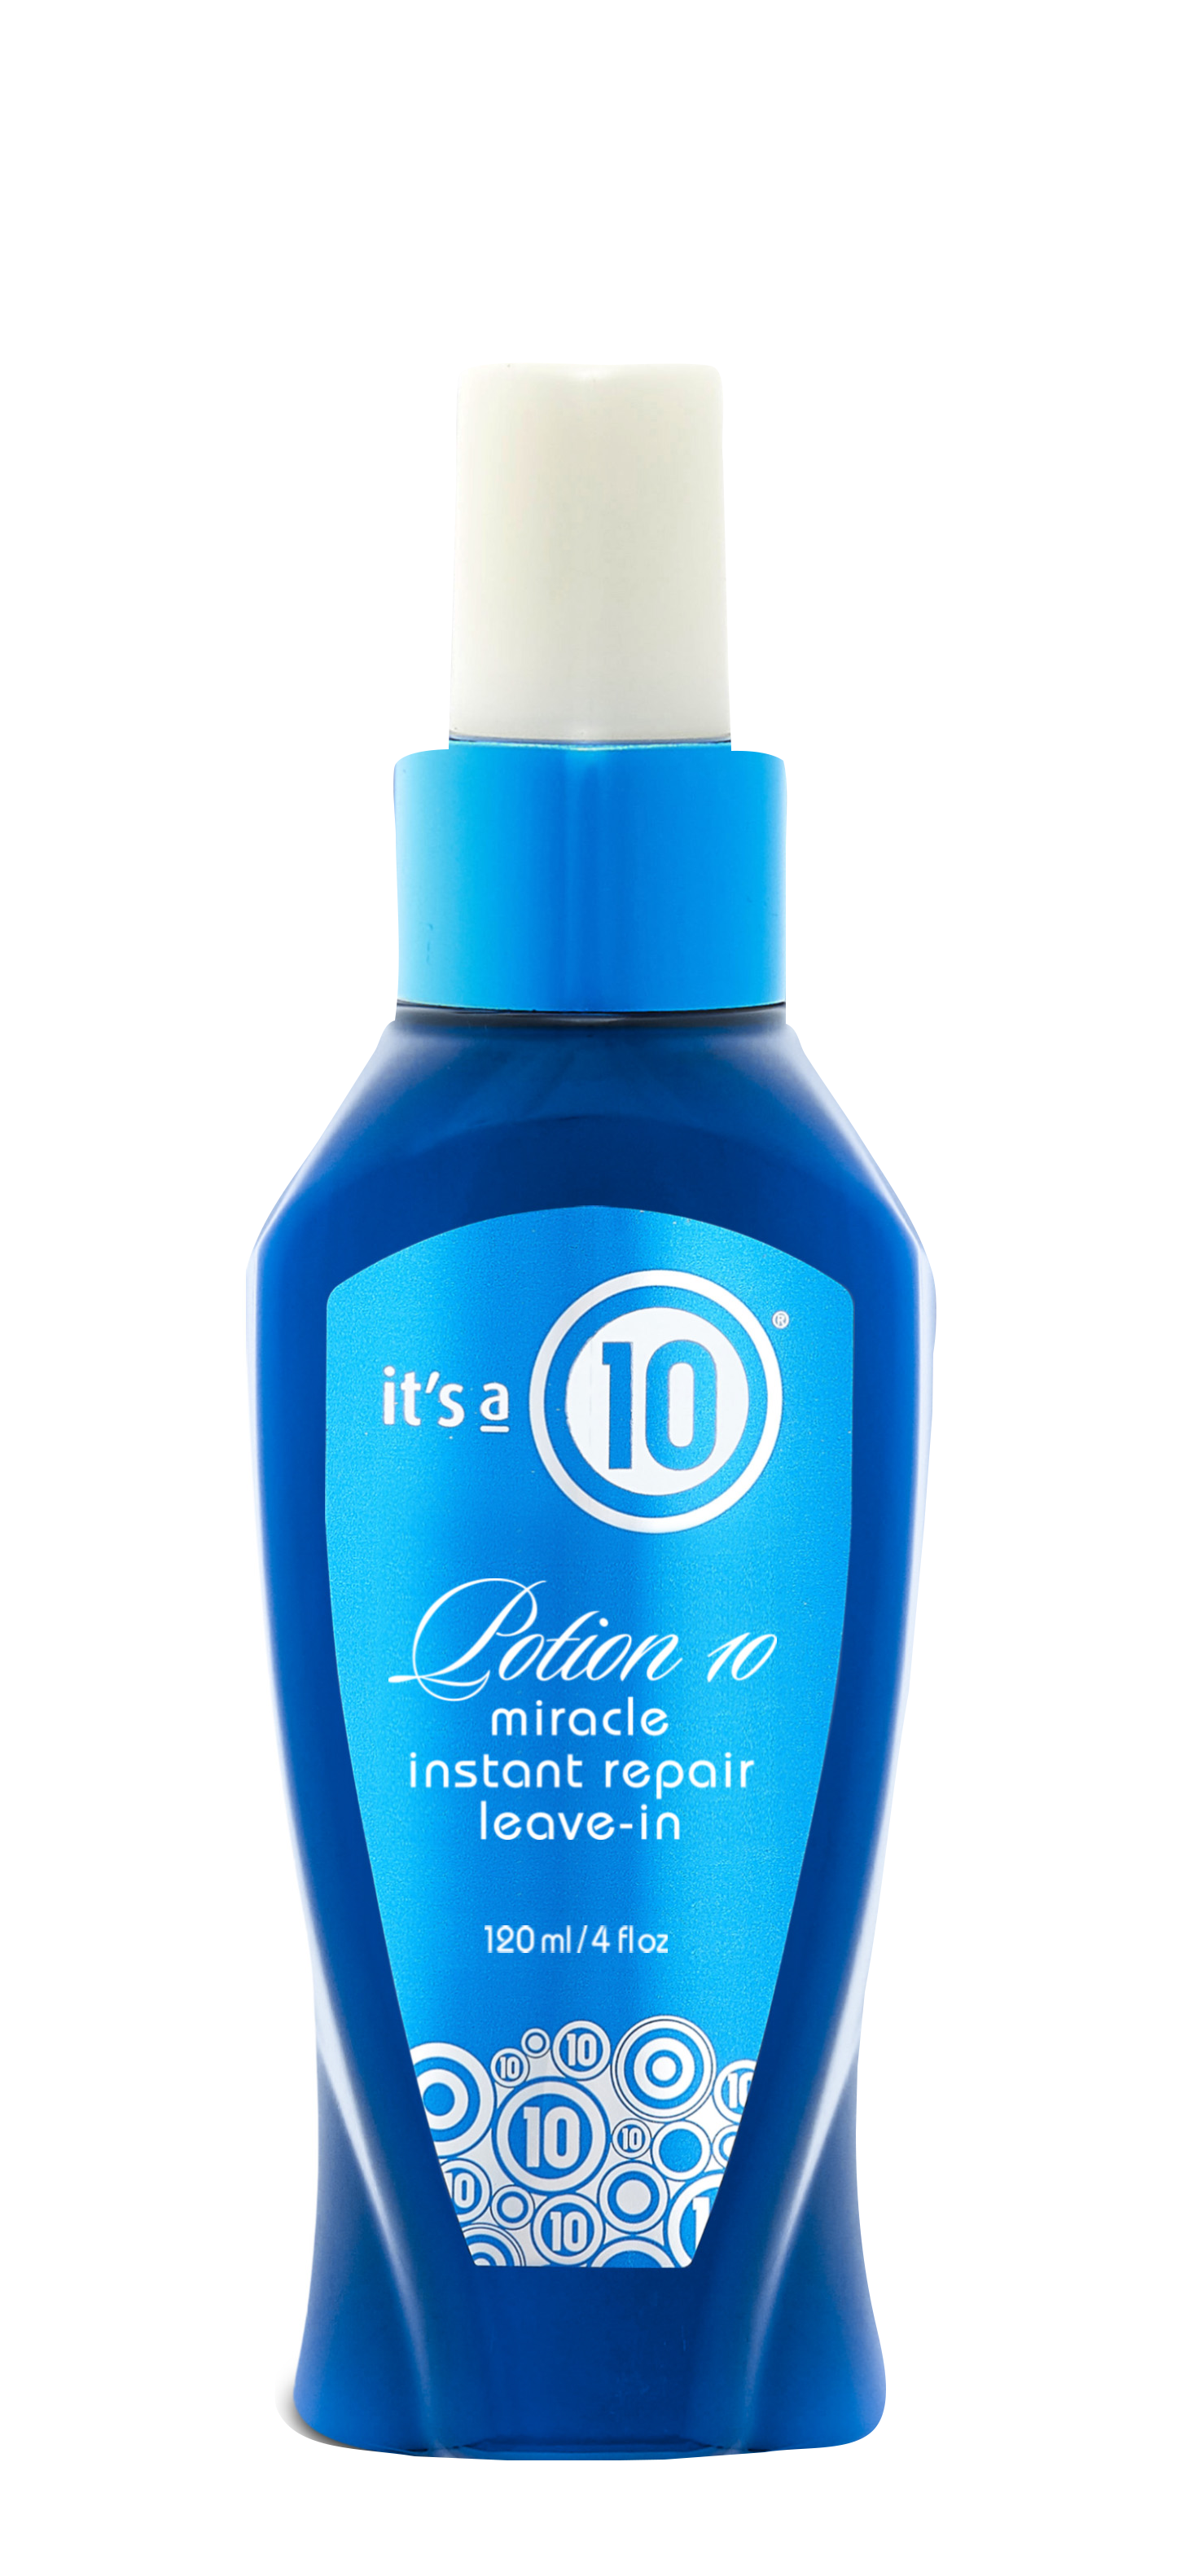 It's a 10 Miracle Instant Repair Leave-In Conditioner